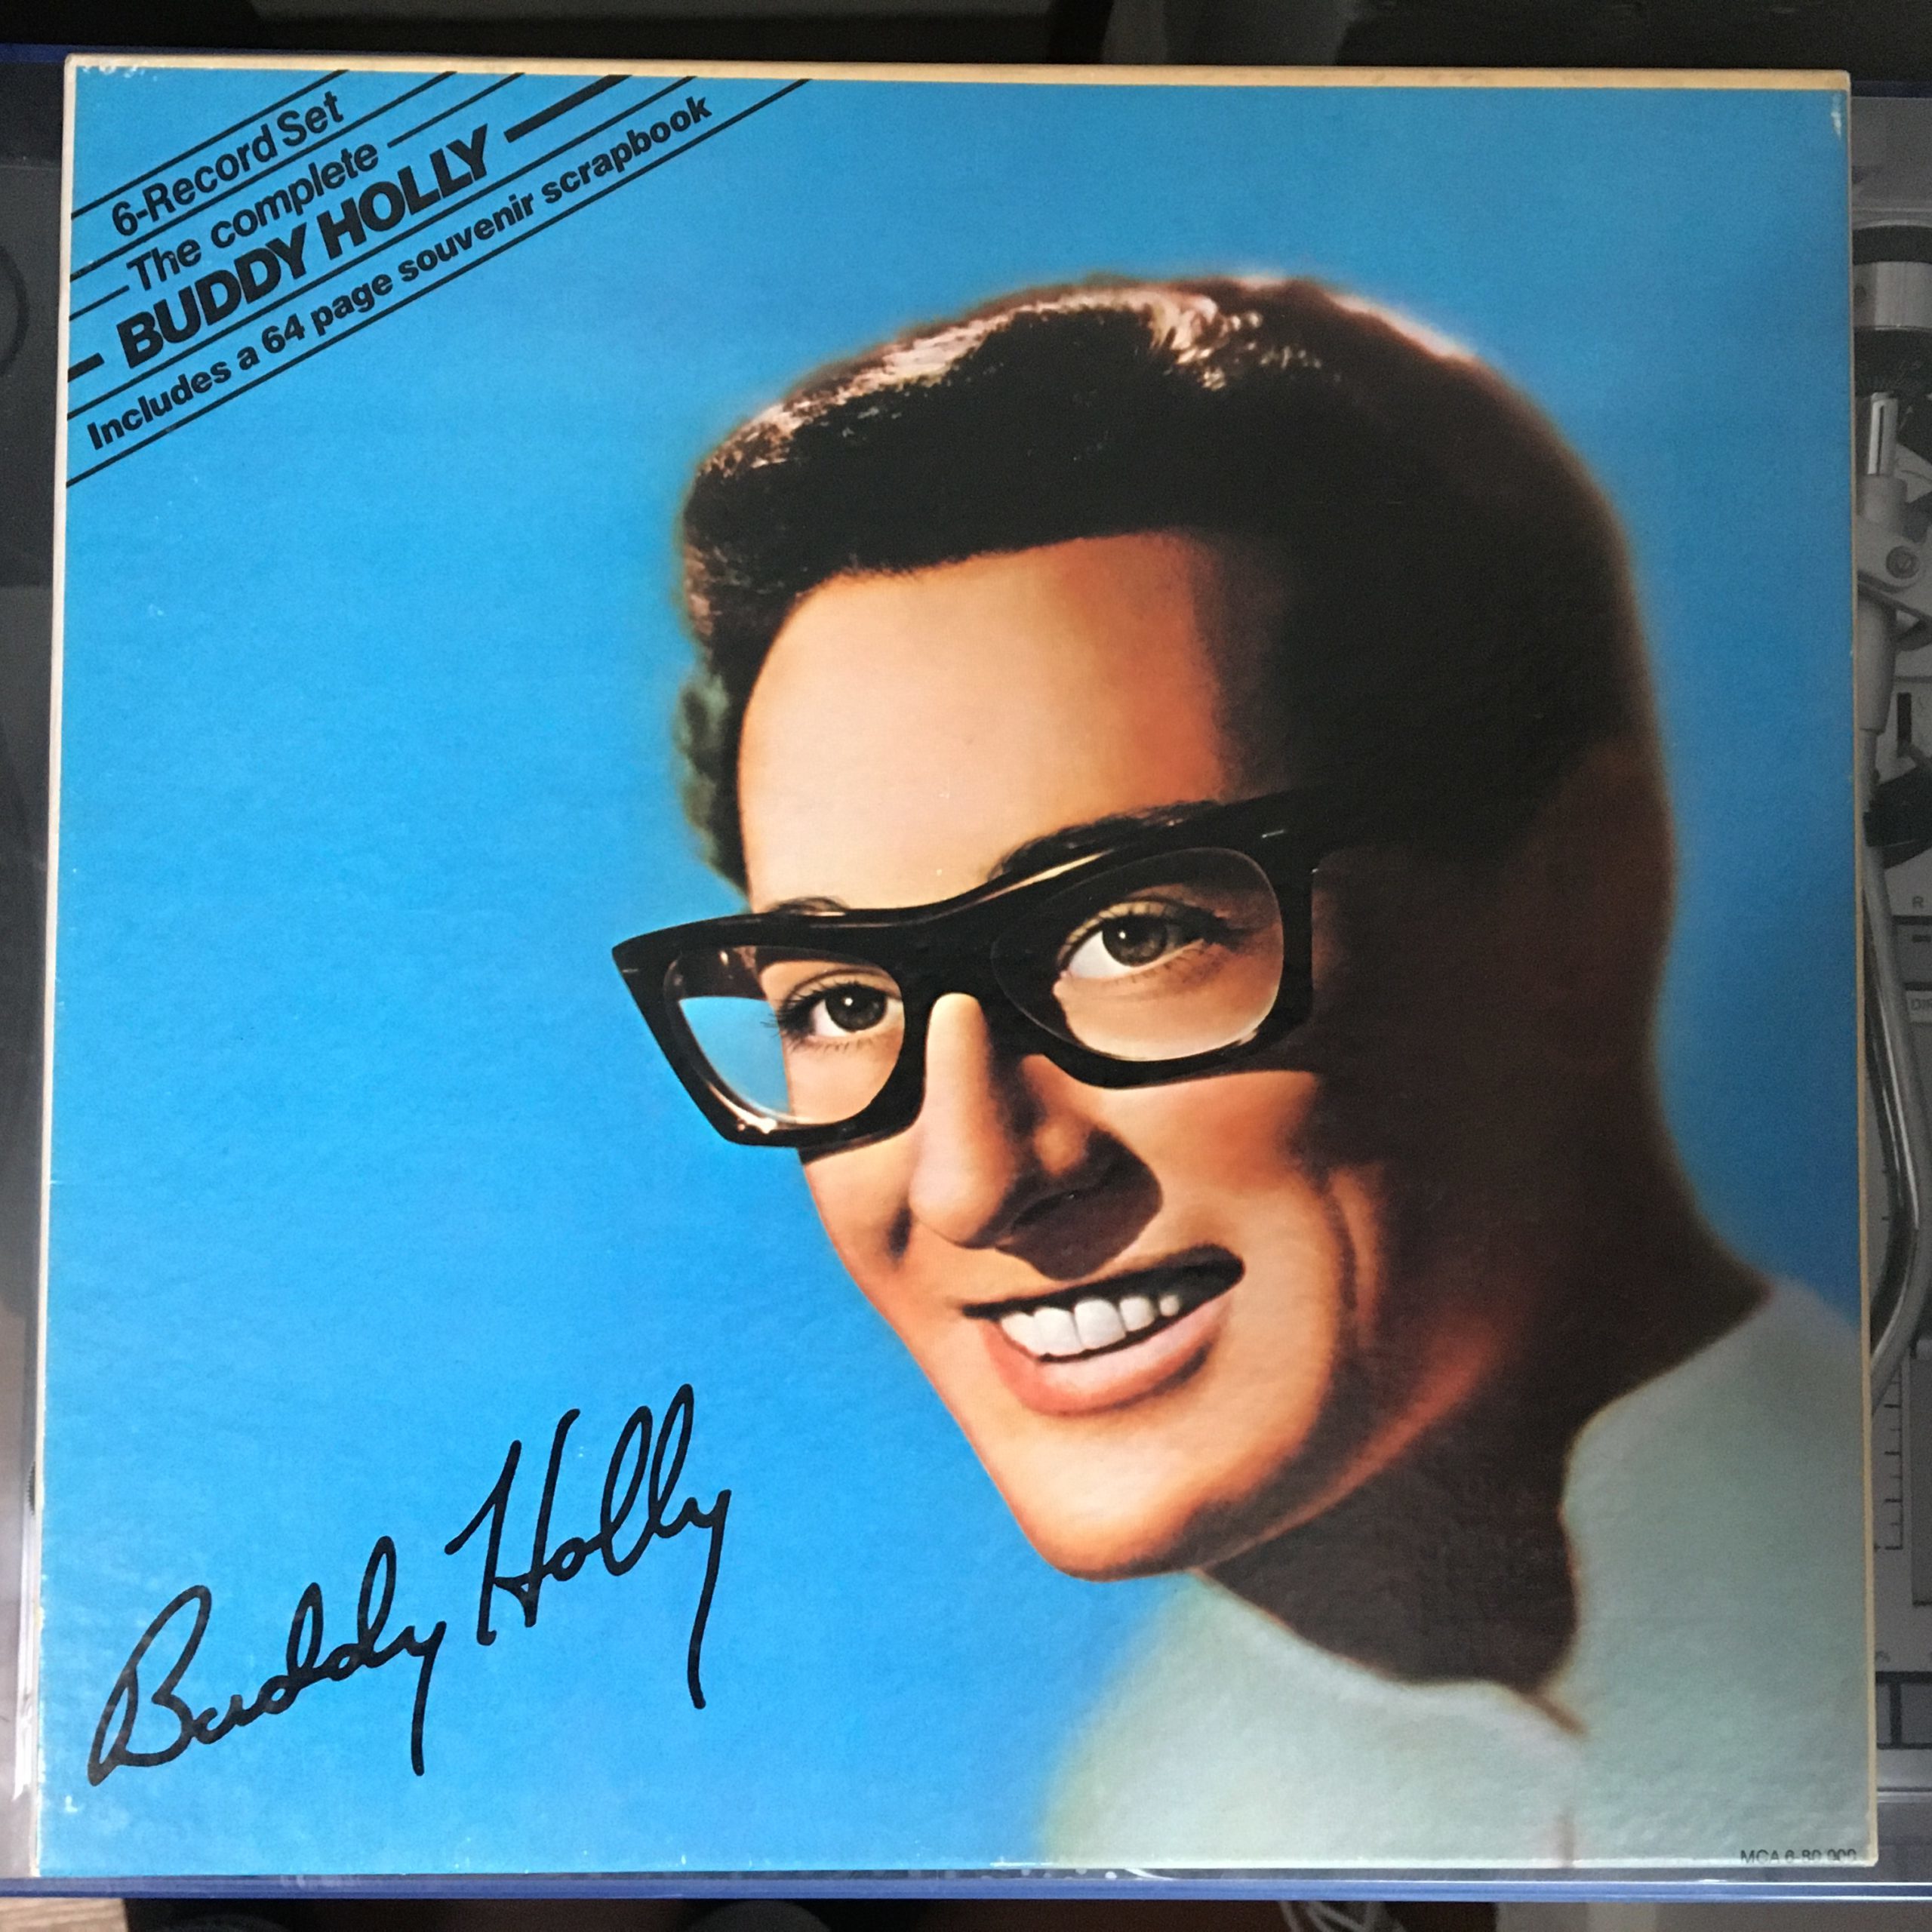 Buddy Holly — The Complete Buddy Holly – Vinyl Distractions